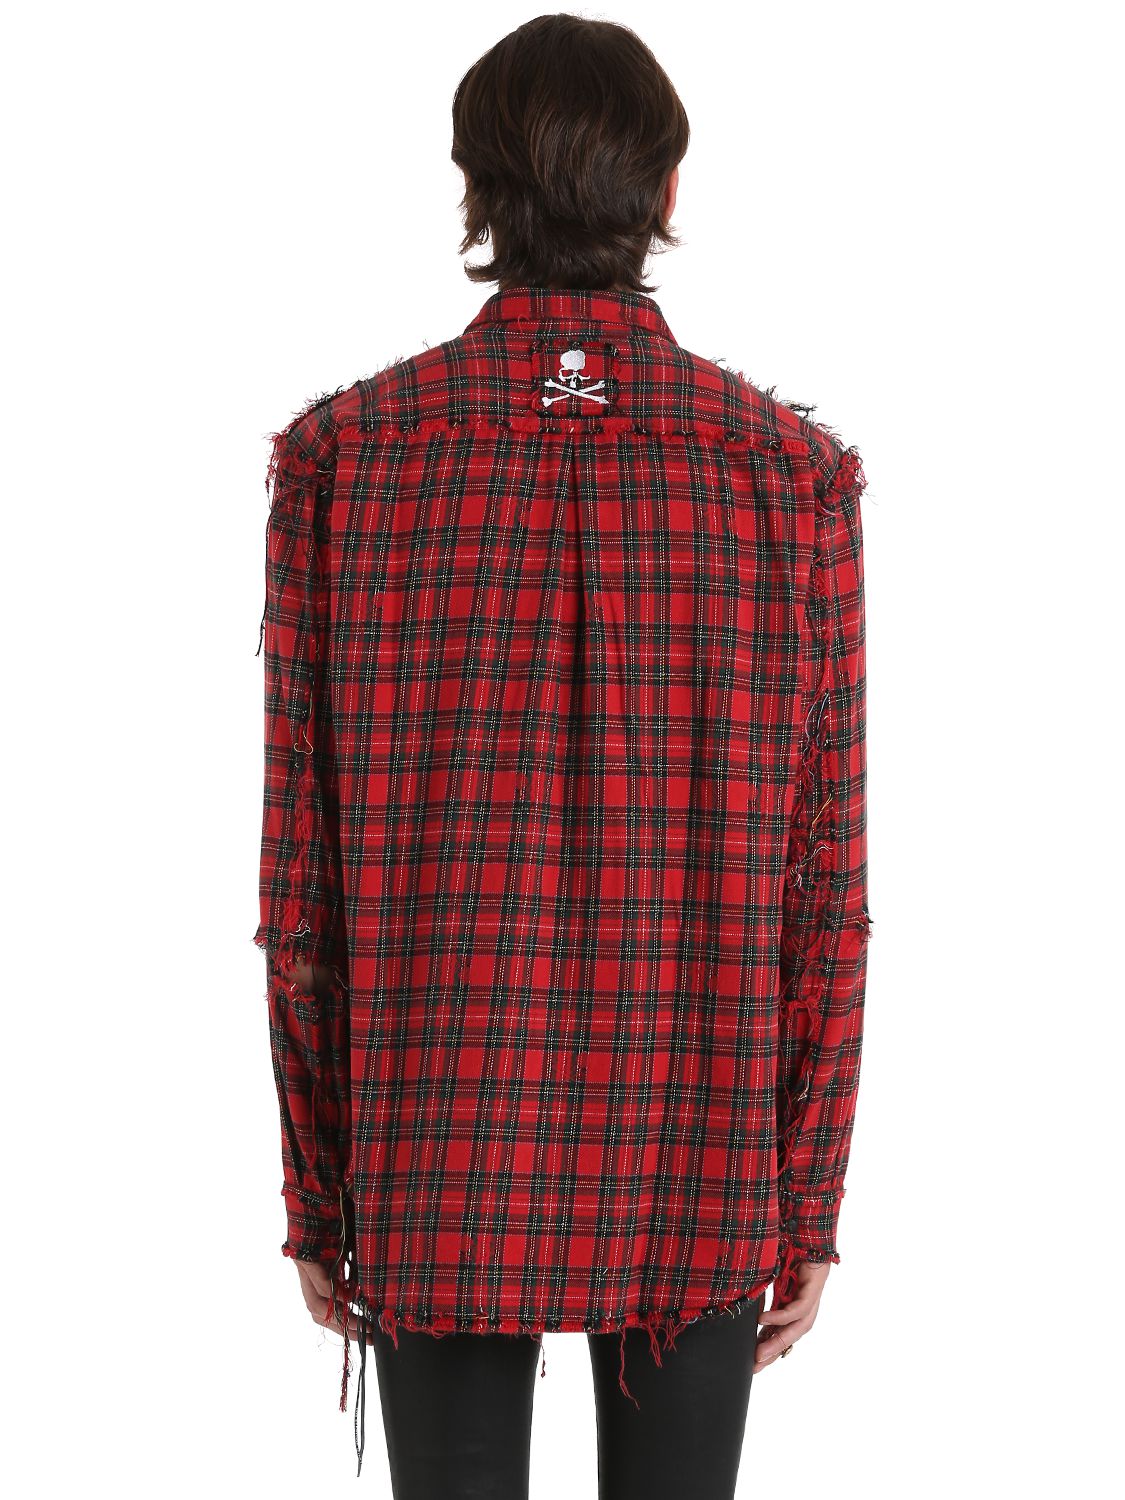 Mastermind Japan Skull Embroidered Cotton Flannel Shirt In Red